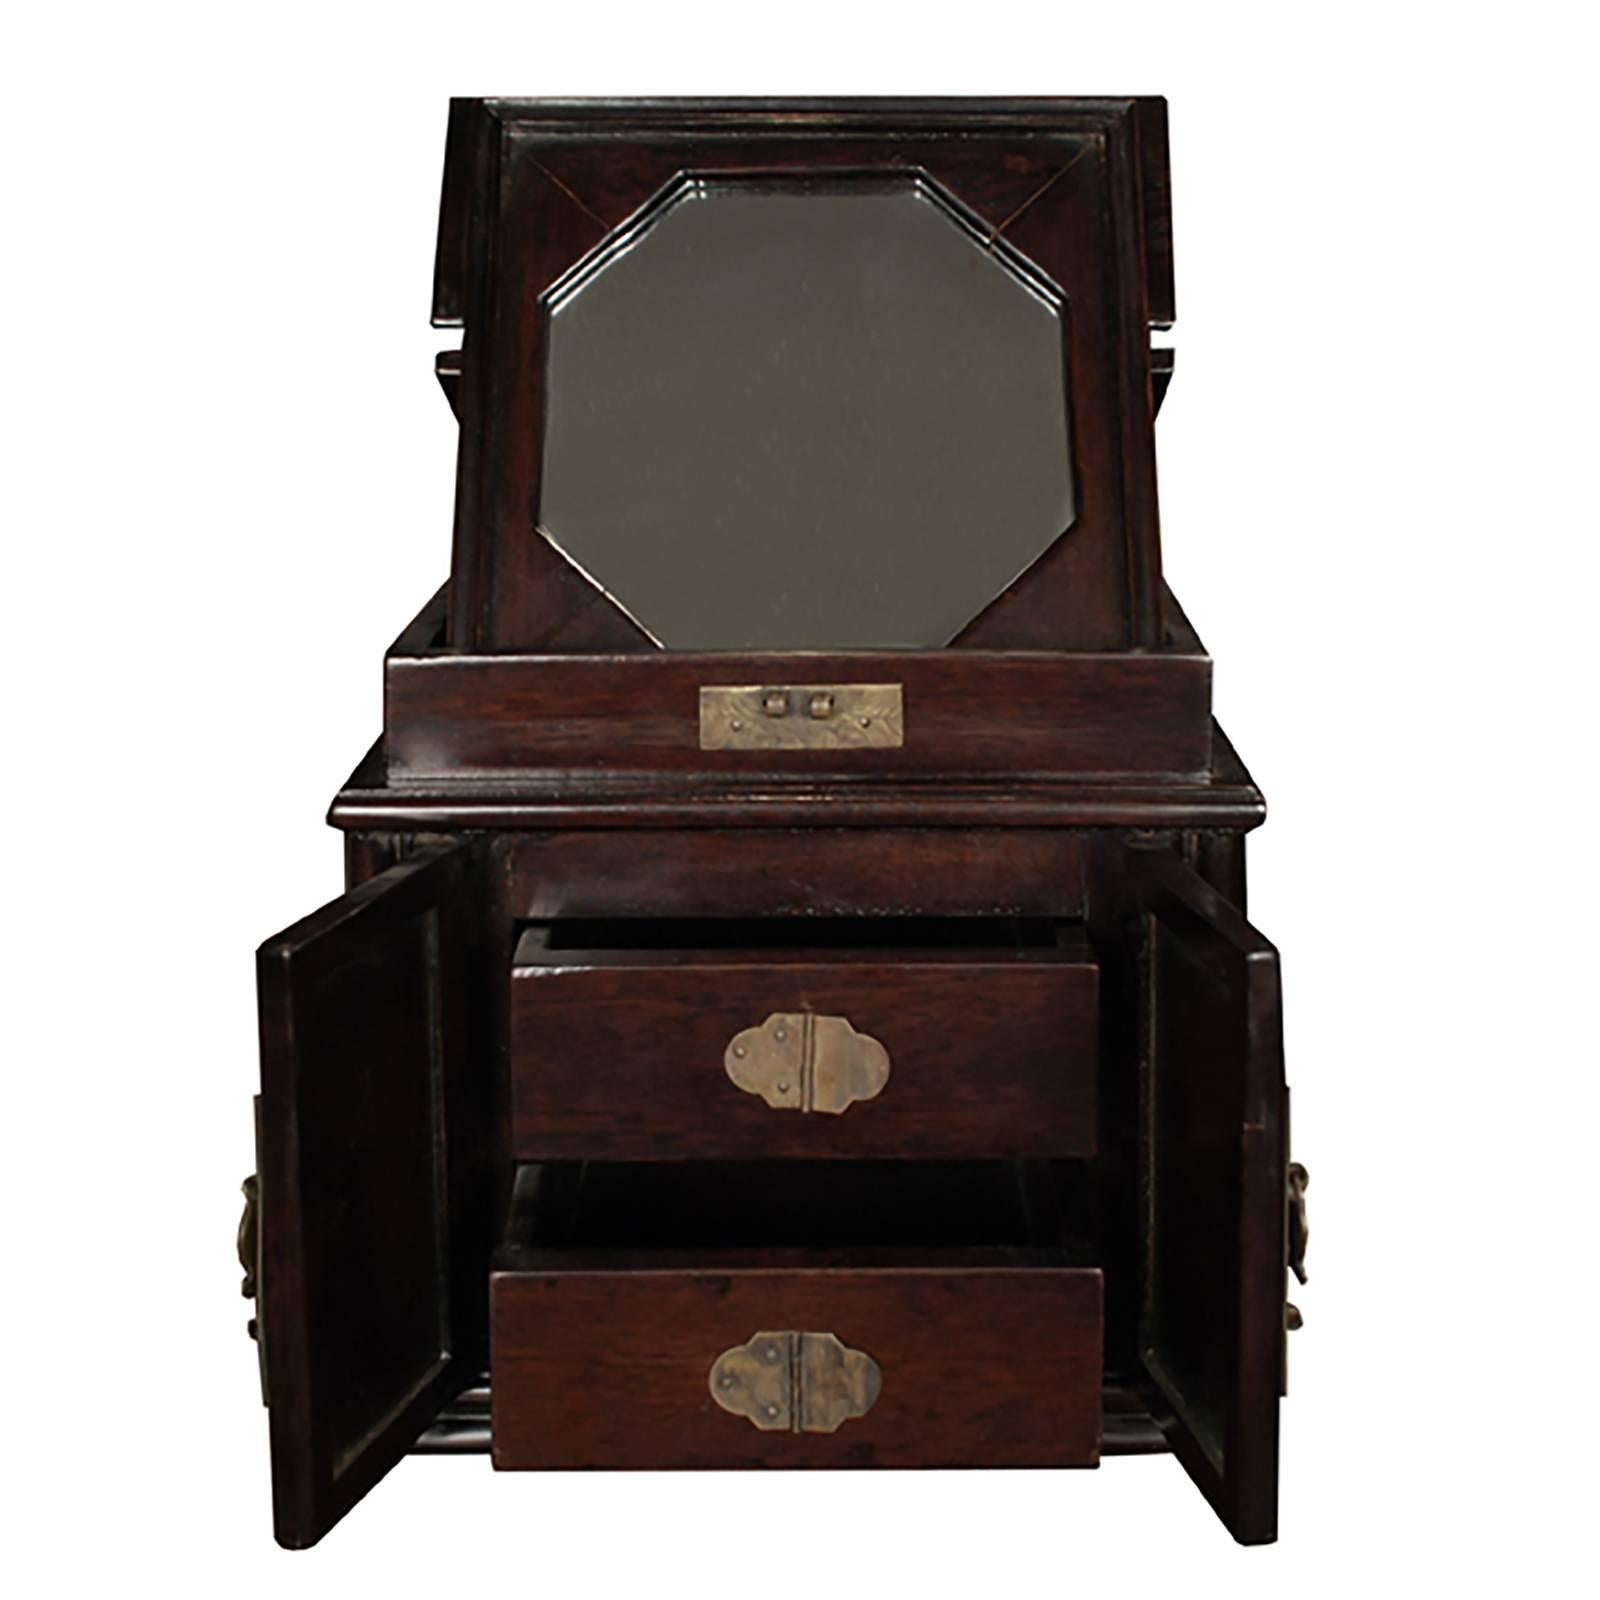 Original brass fittings detail this finely crafted rosewood vanity box. Thoughtfully designed at the turn of the century with a hinged top to conceal an octagonal mirror within, this petite box has beautifully detailed panels on its doors and small